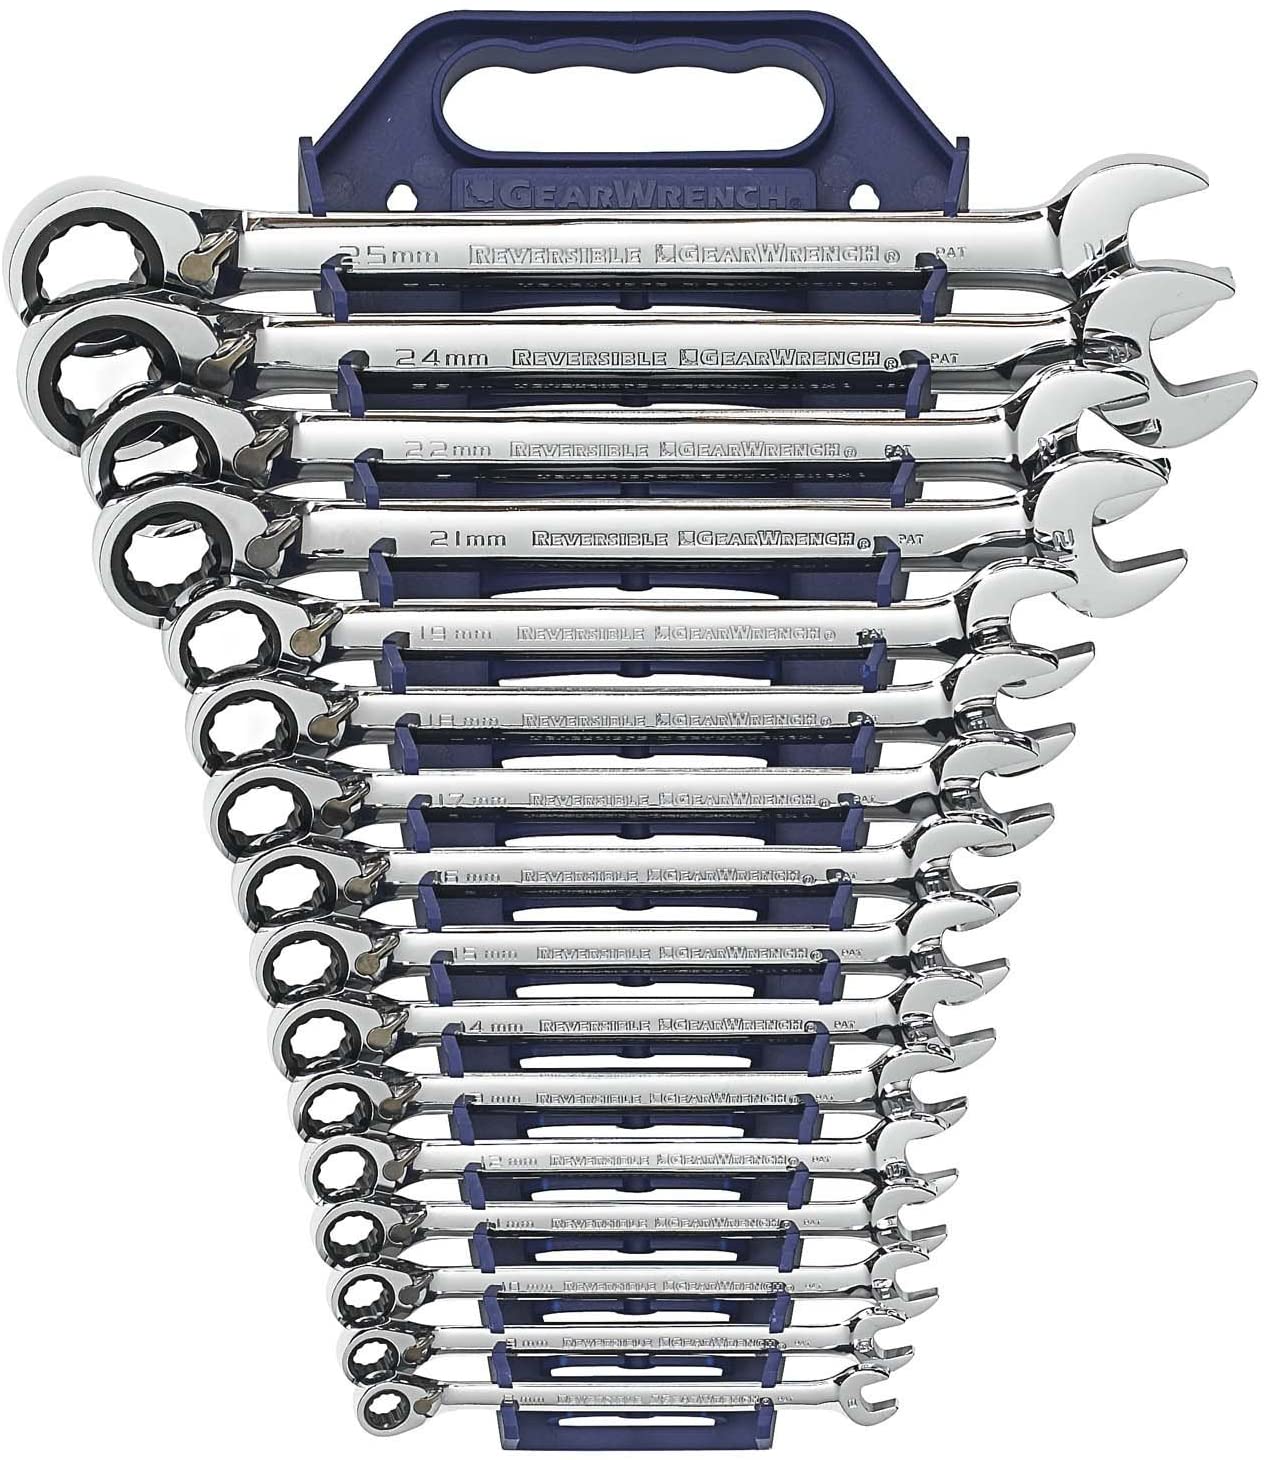 GearWrench 9602 16-Piece Reversible Combination Ratcheting Wrench Set.  Metric